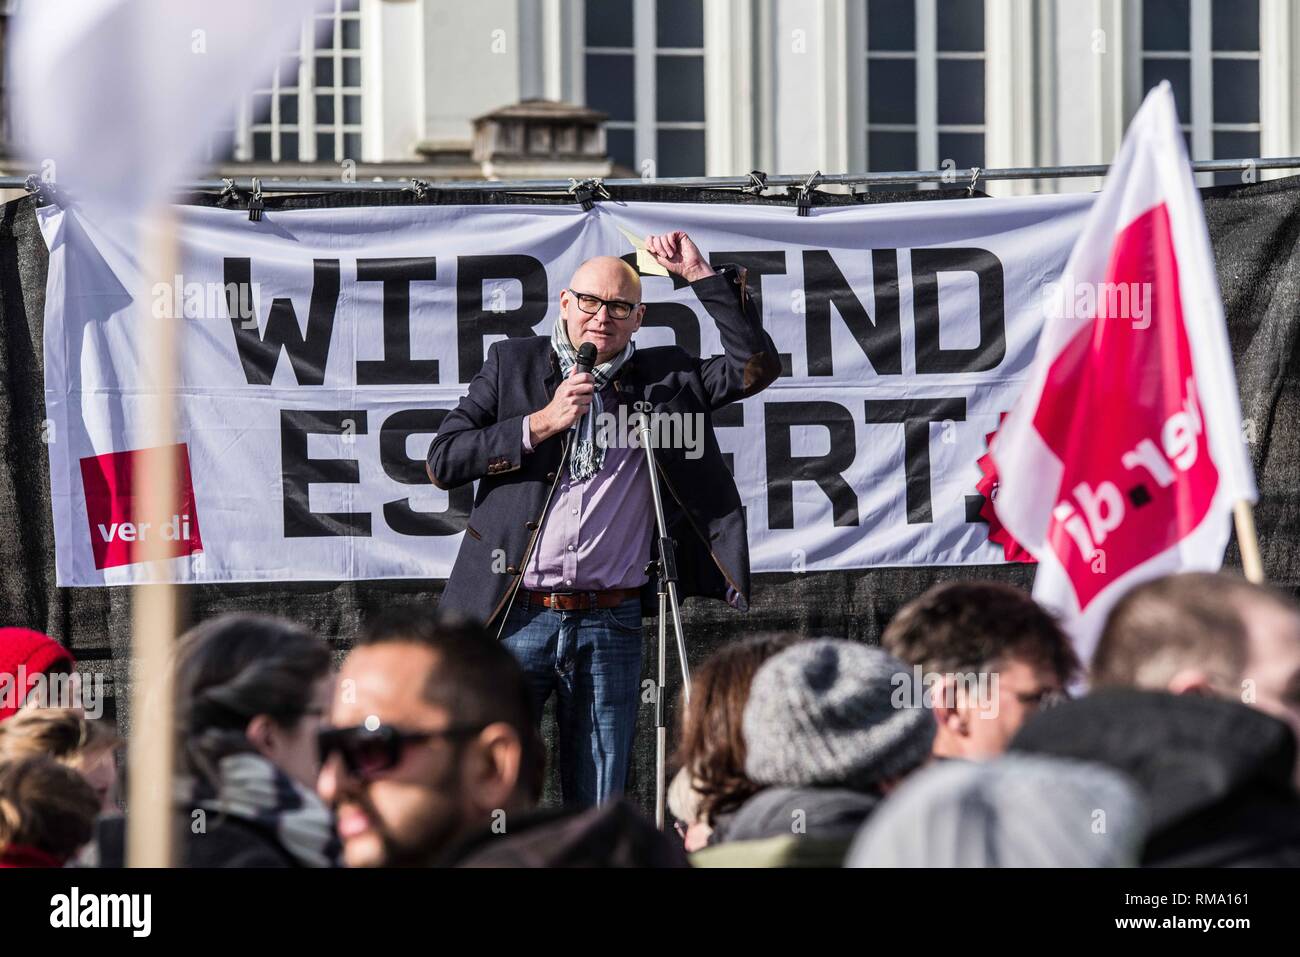 Munich, Bavaria, Germany. 14th Feb, 2019. To signify the failure of the second round of talks with employers, the German Verdi Ver.di labor union organized a 200  strong flashmob action at the famed Schloss Nymphenburg in Munich to kick off a new strike wave. Credit: ZUMA Press, Inc./Alamy Live News Stock Photo